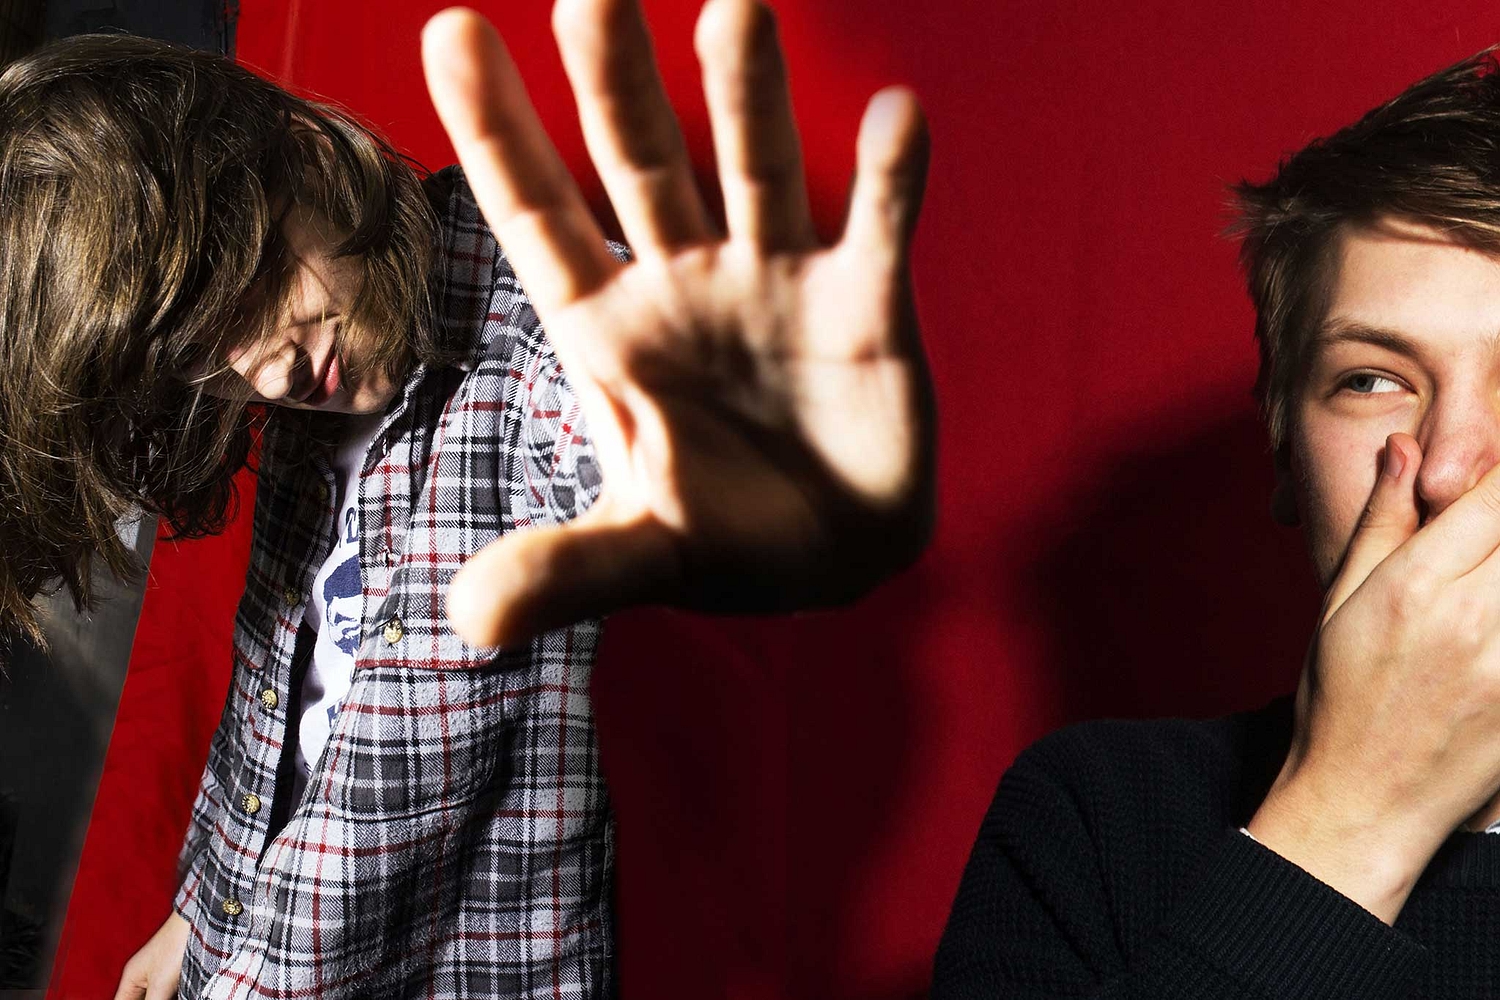 Drenge: "Why doesn’t everyone find us really funny?"